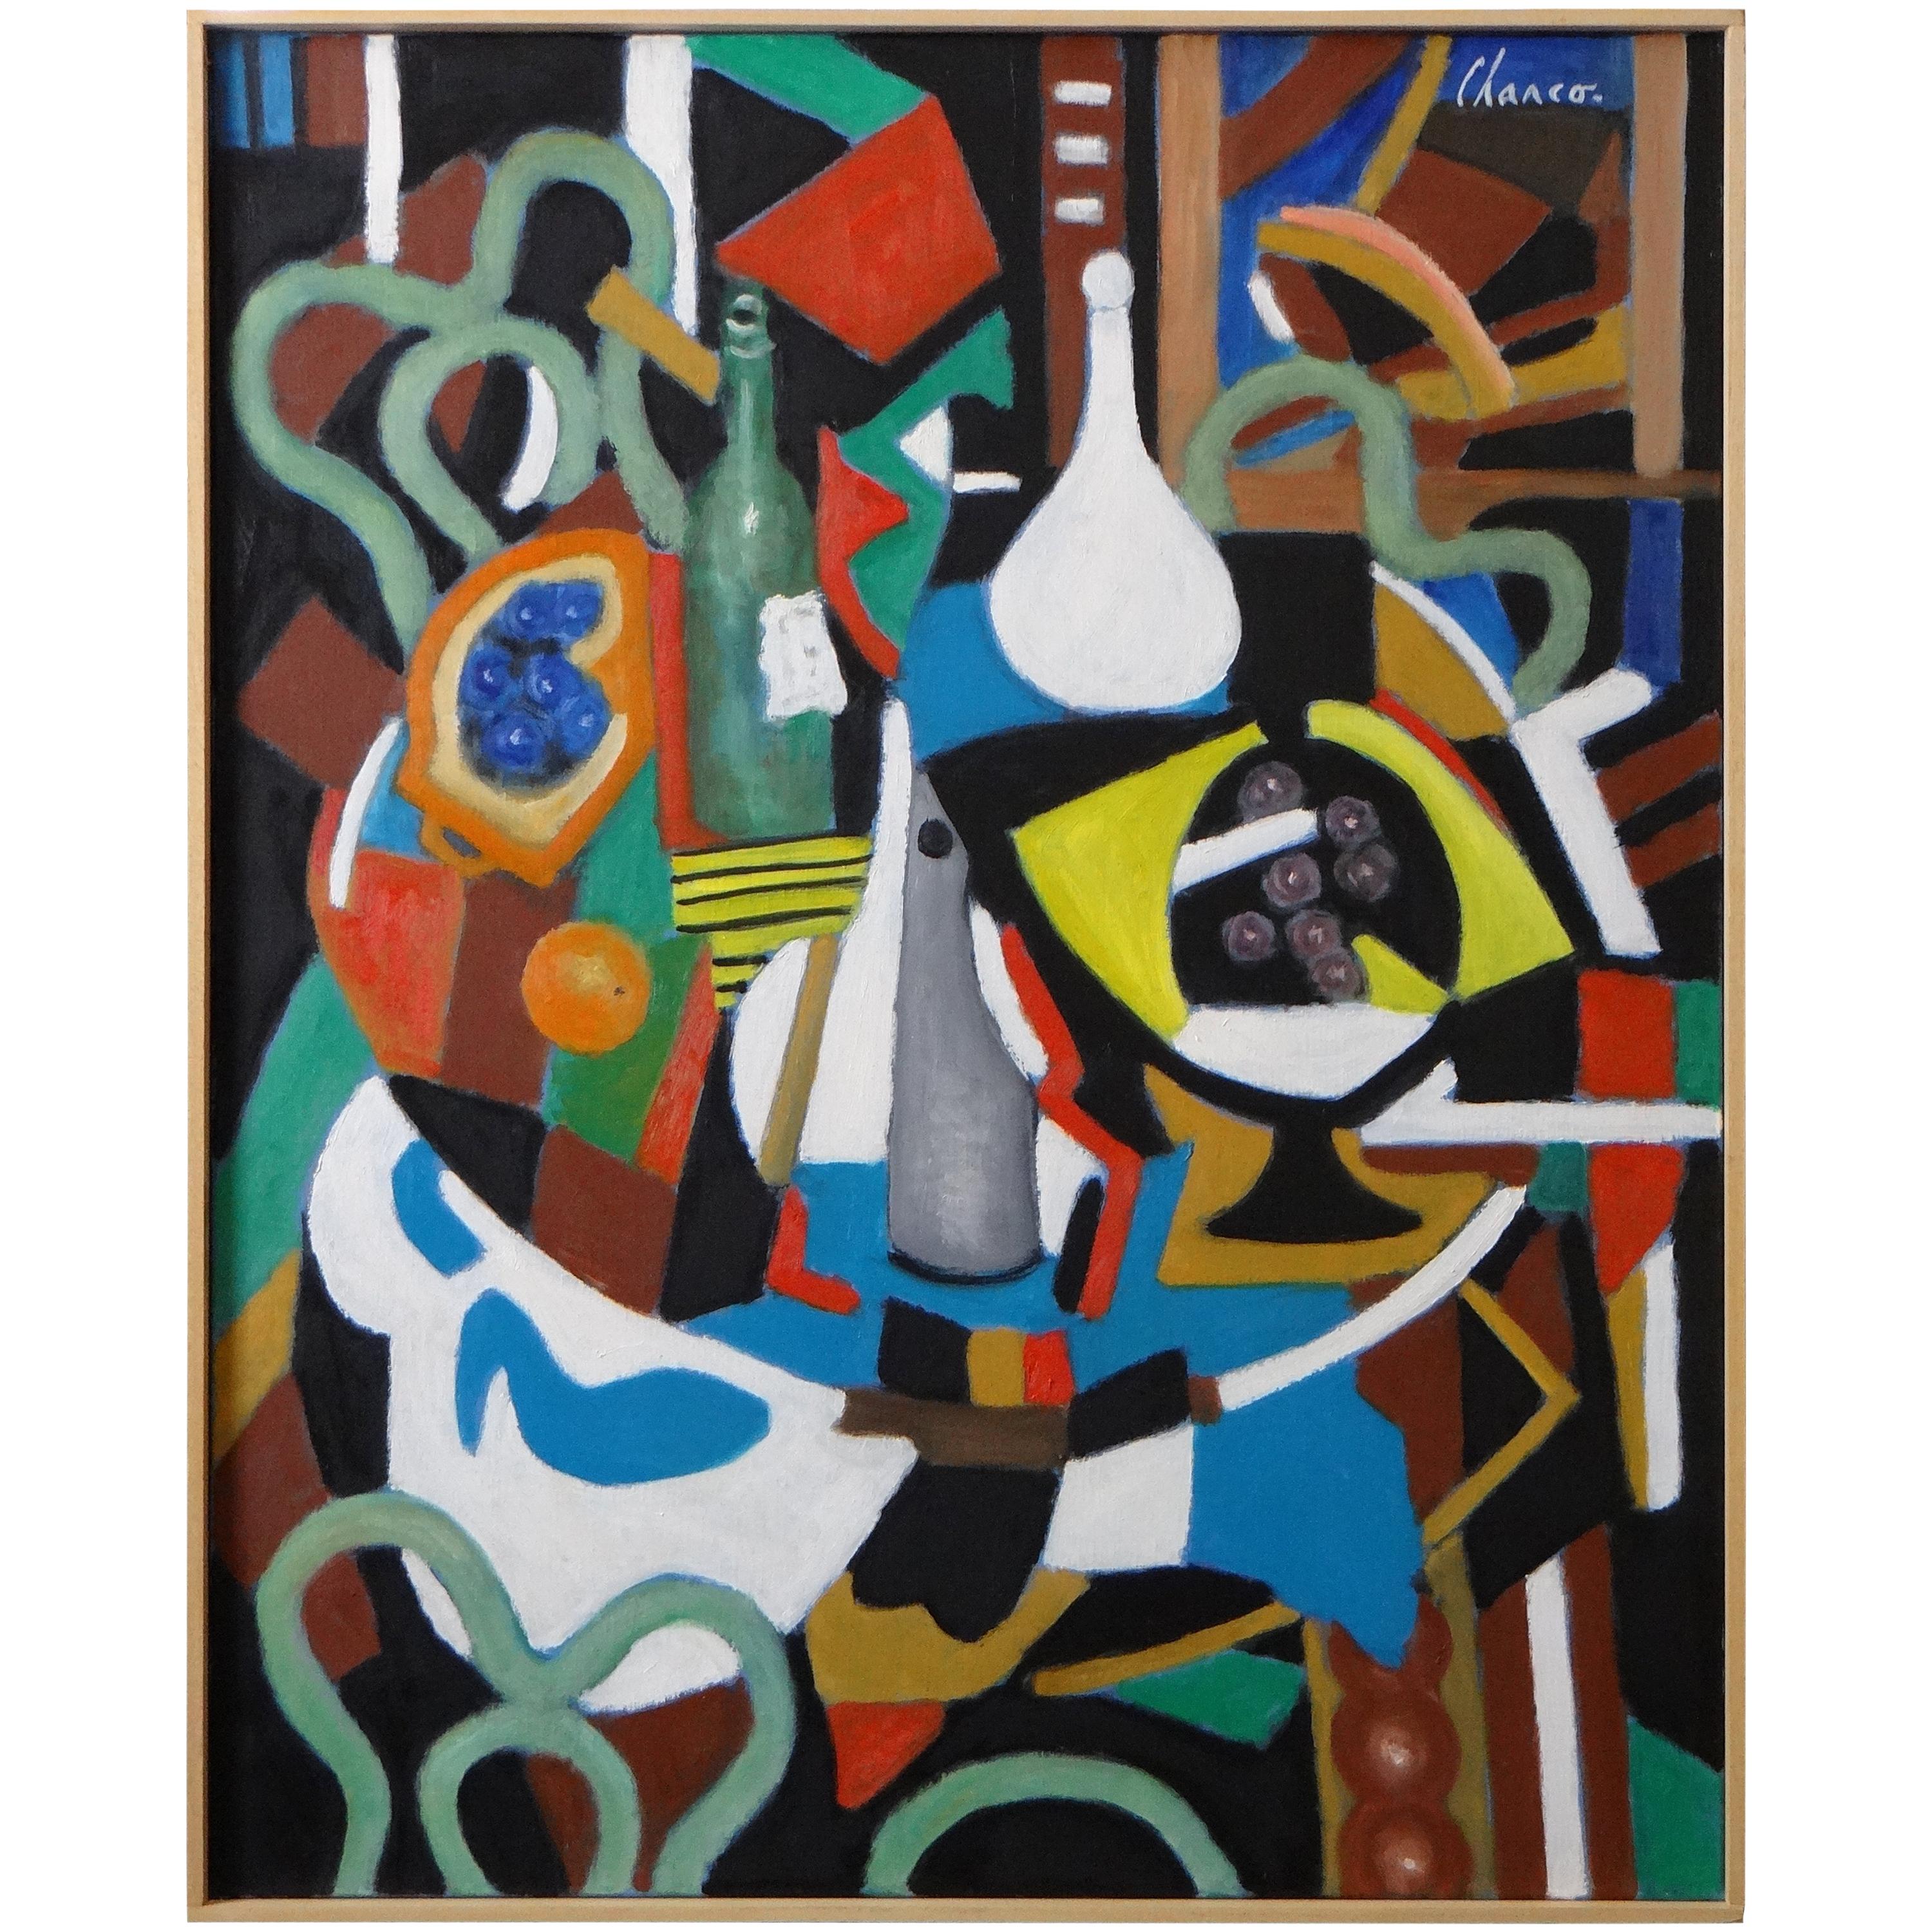 Roland Chanco Painting "Coupe Jaune et Carafe Blanche", 2000 For Sale